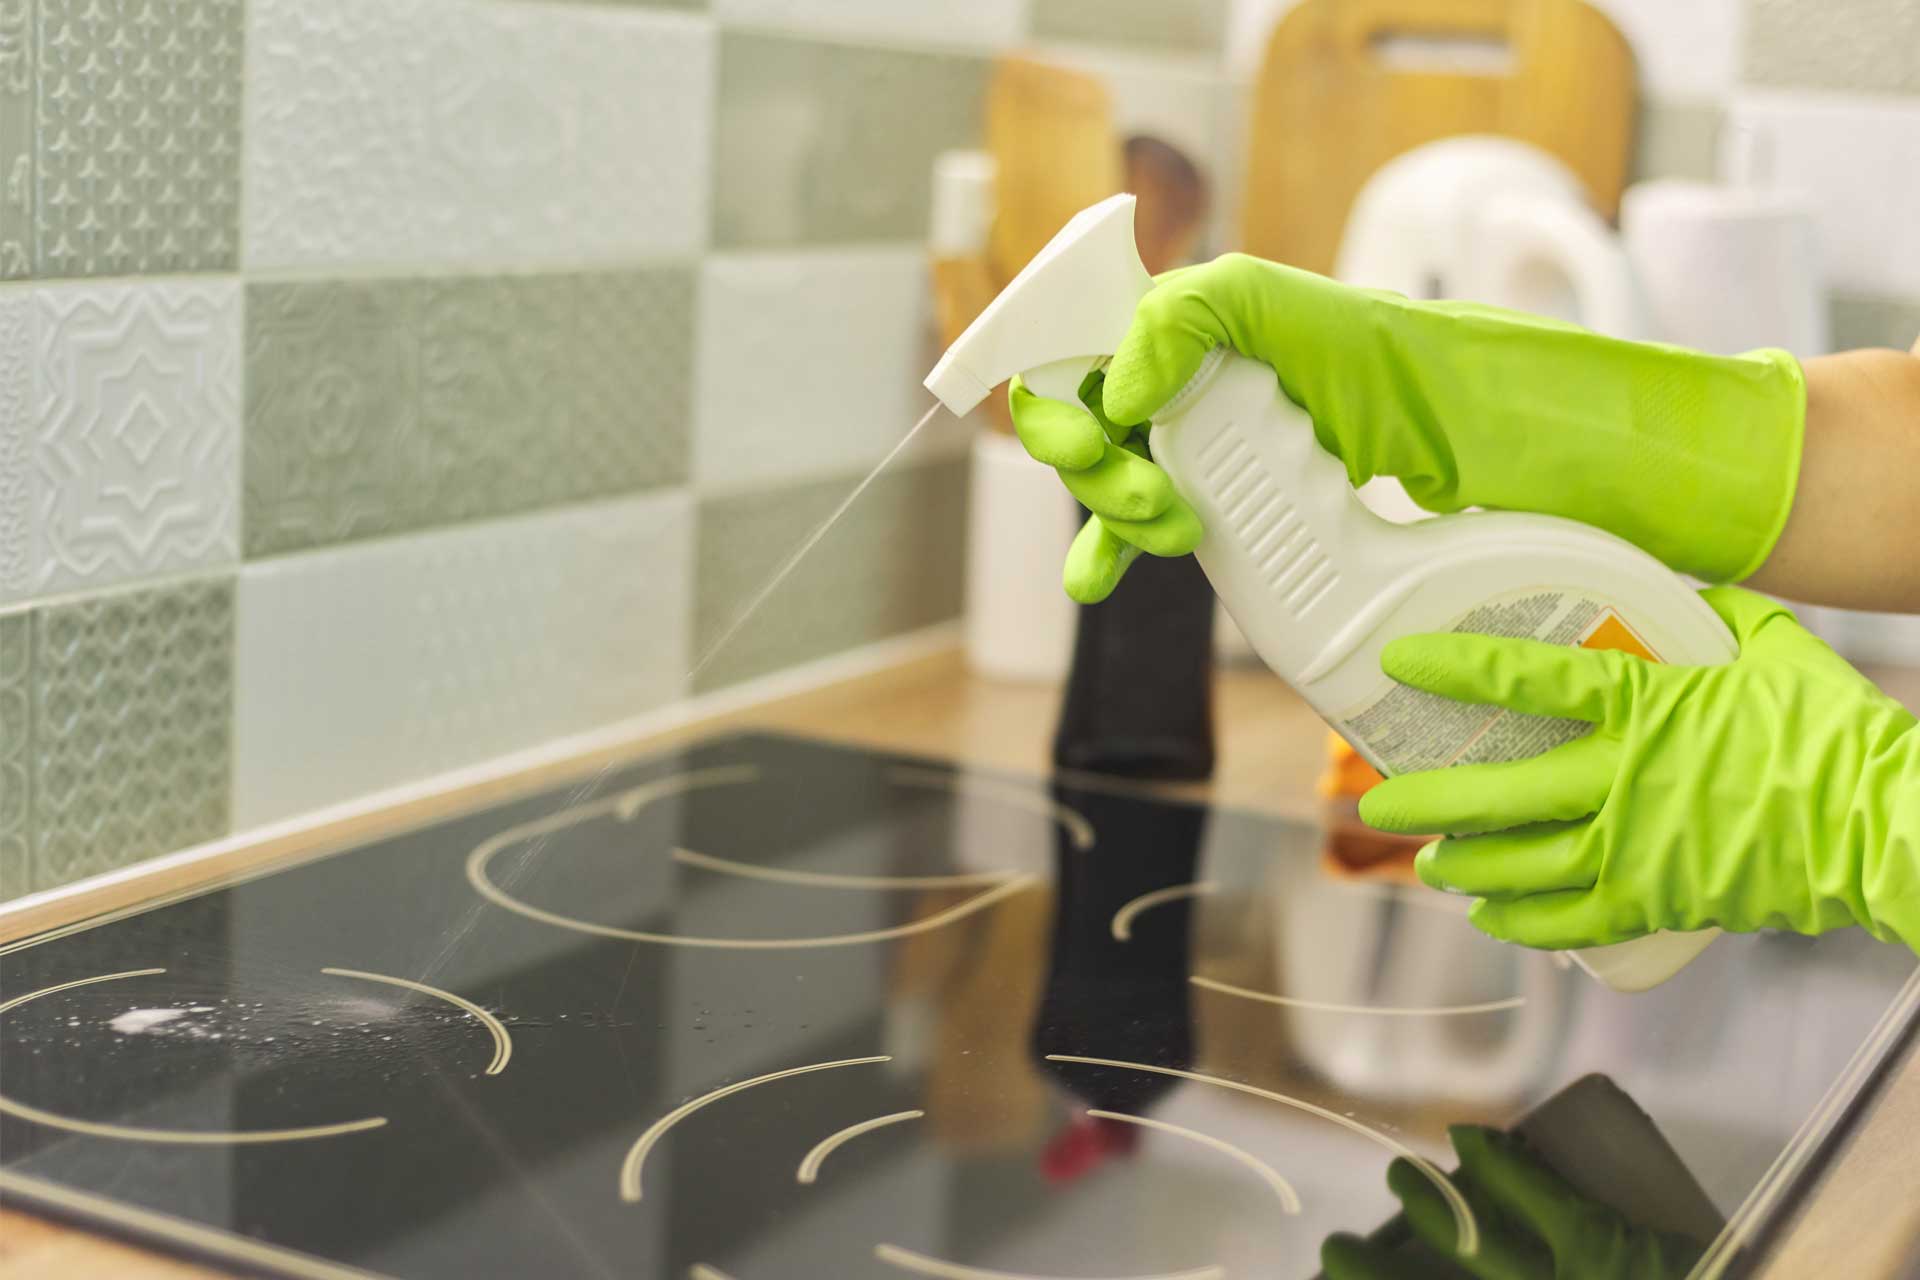 About Us | Atlanta Home Cleaning Services | Lisa's Natural Home Cleaning